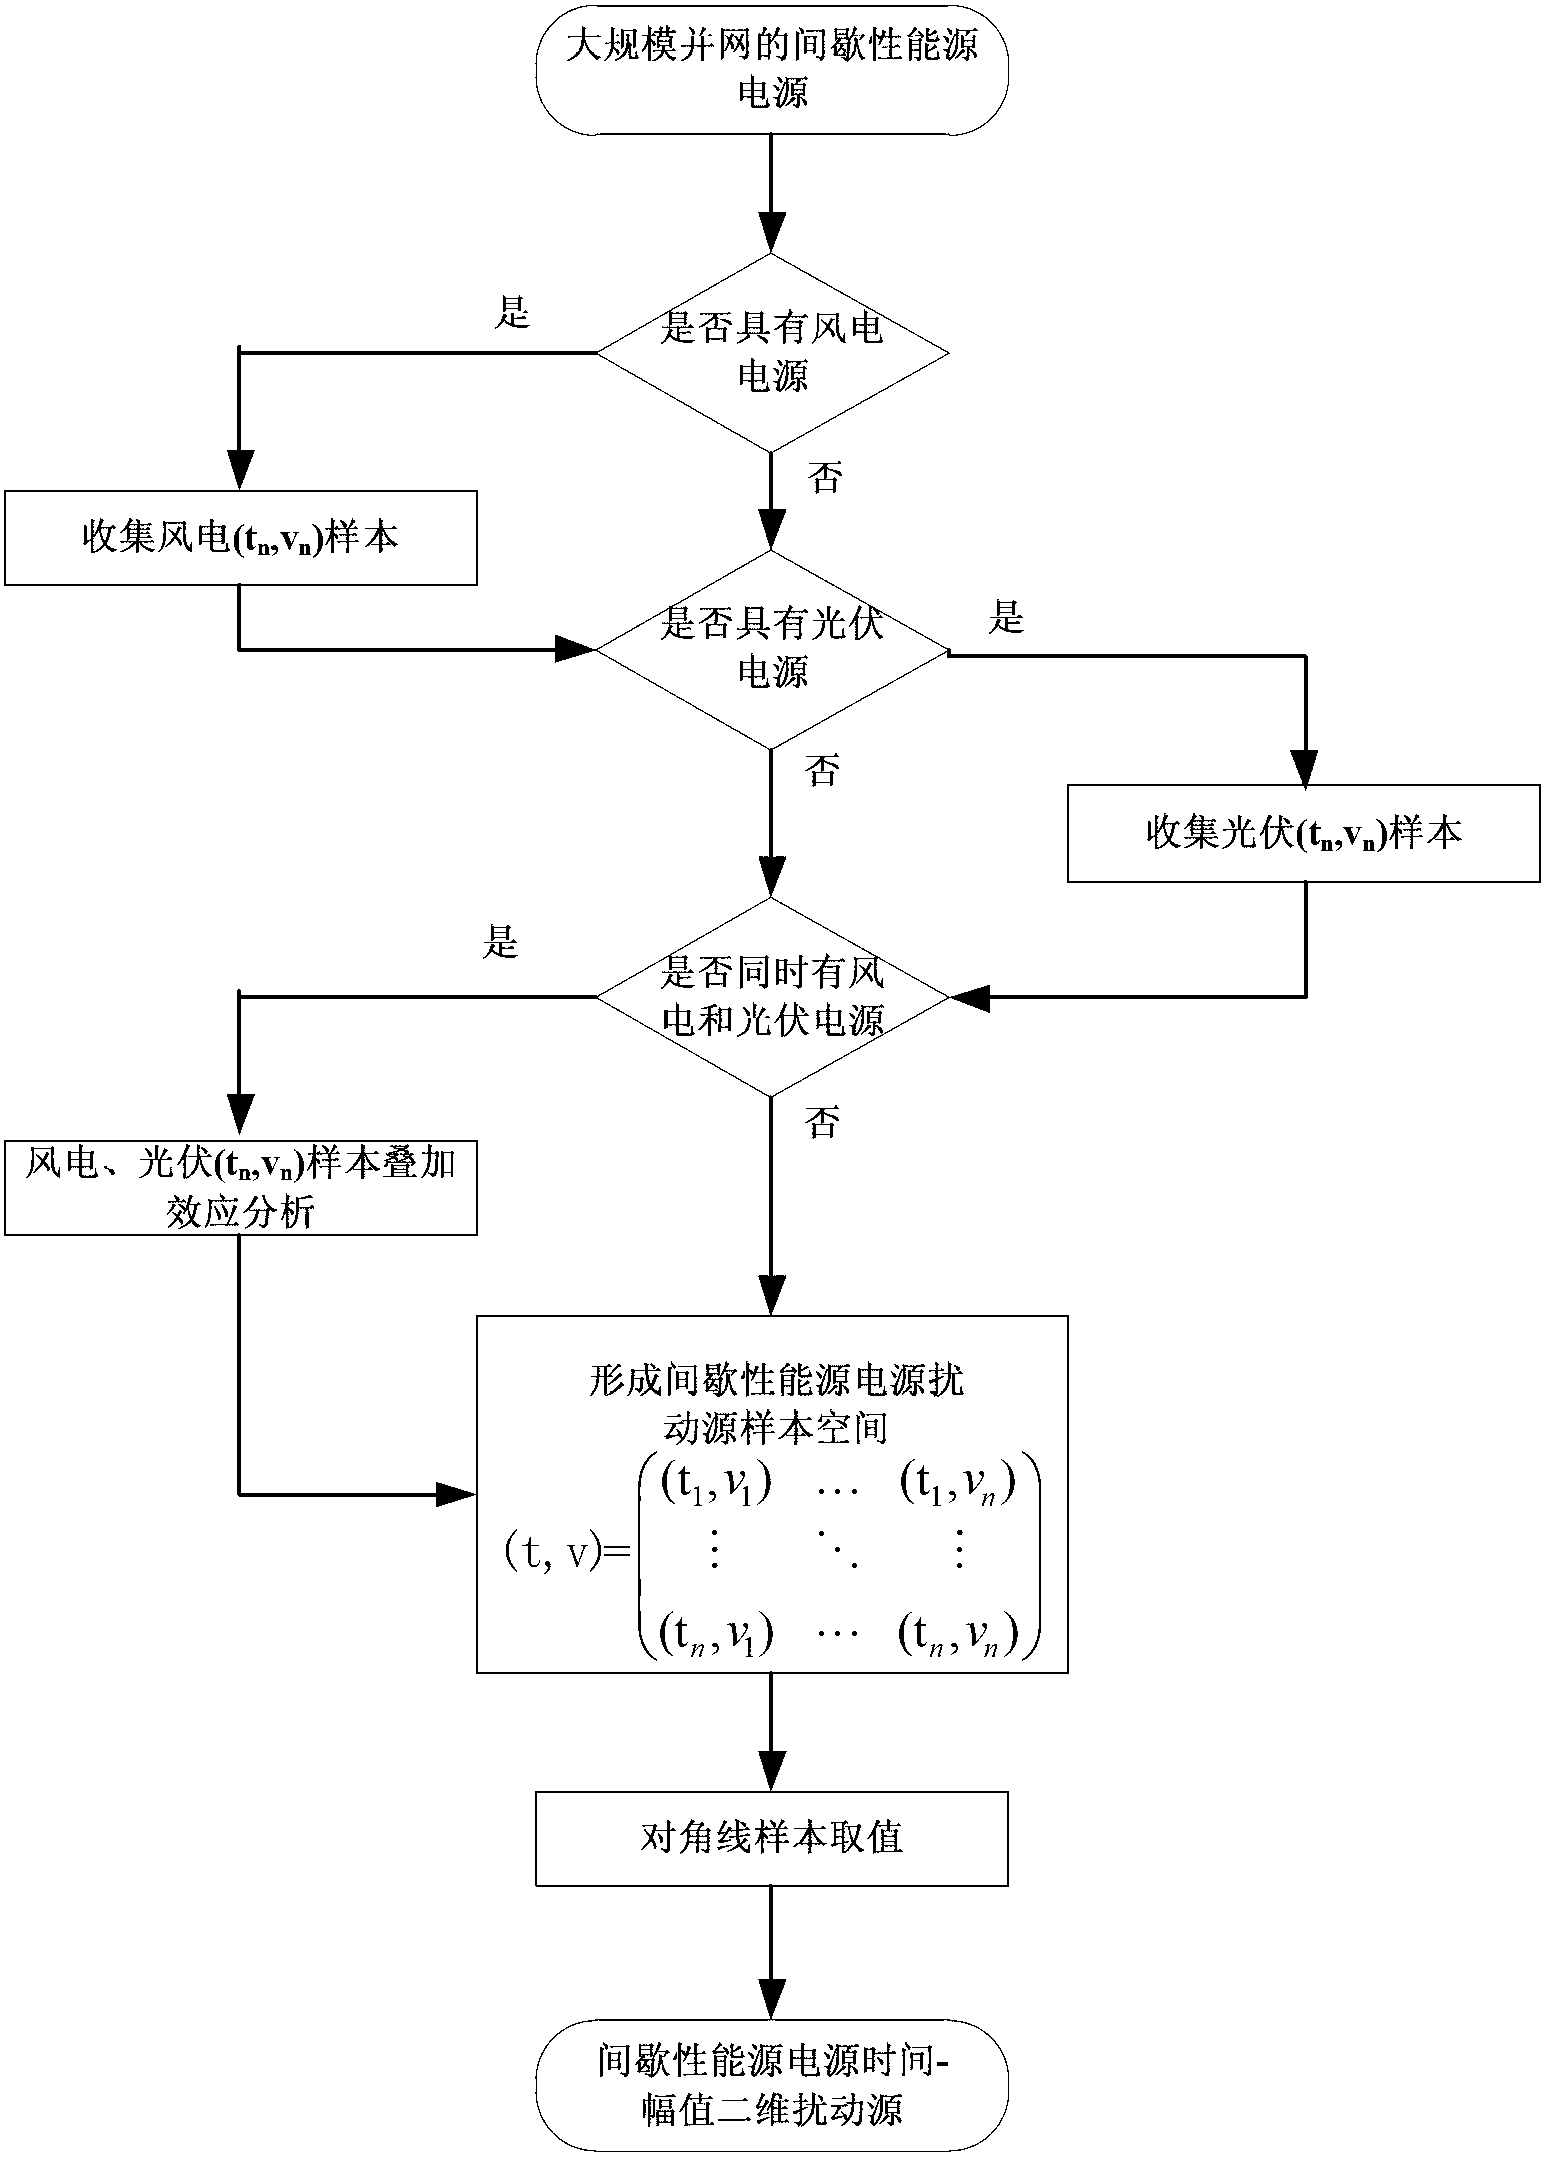 Design method of automatic generation control model under intermittent energy grid-connection